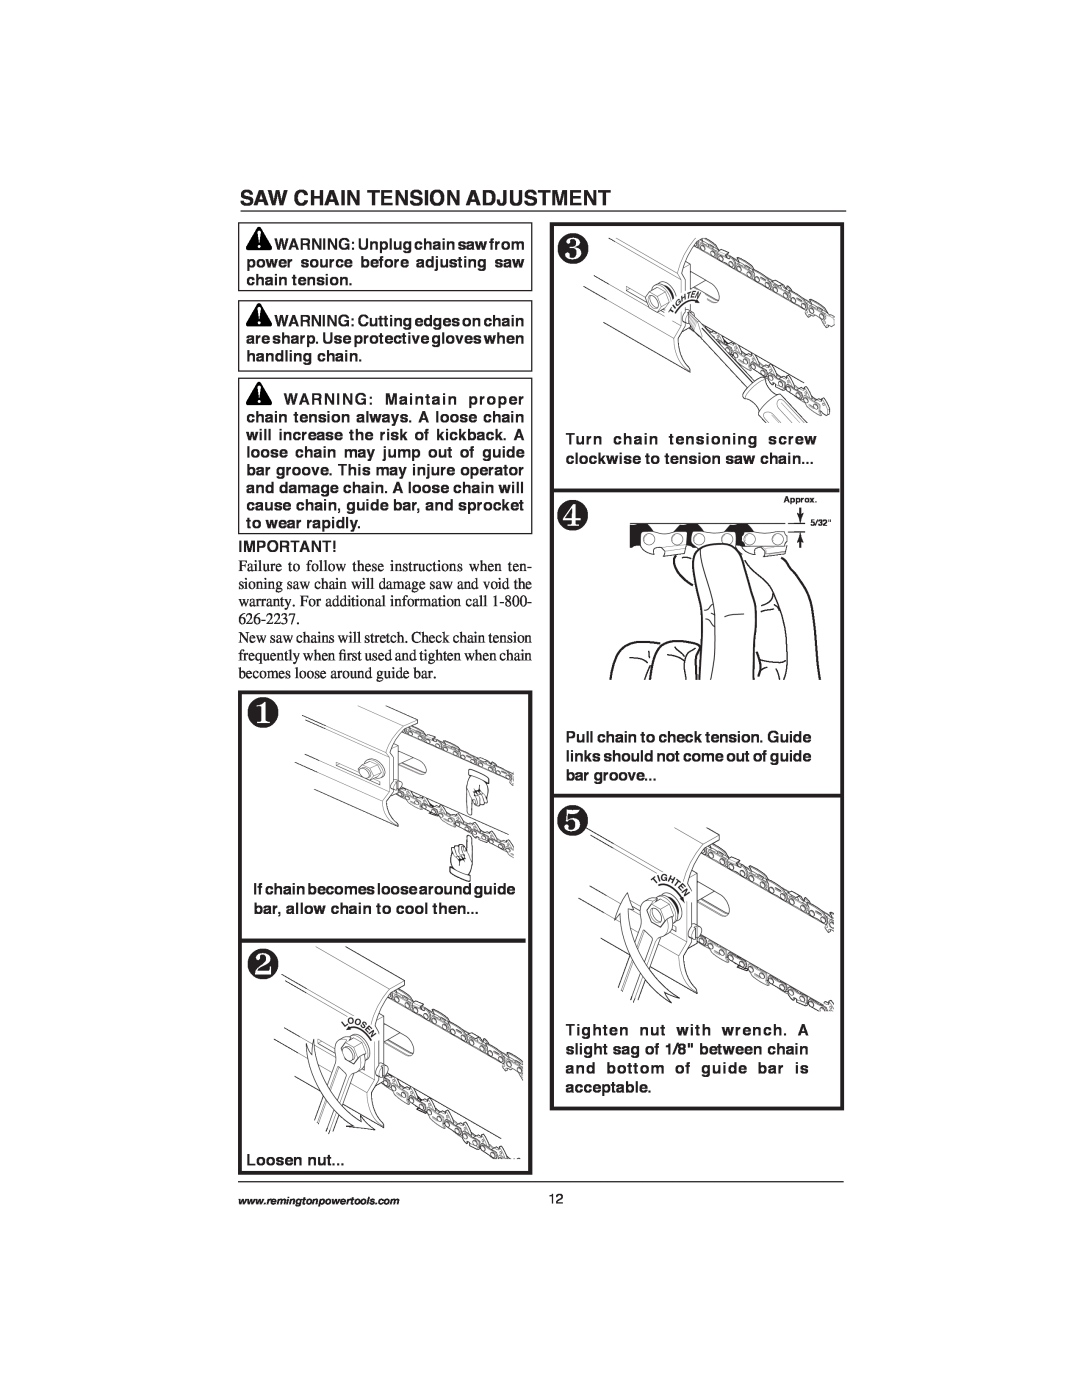 Remington Power Tools M30016AS, M15014AS, M15012US, M35016AW, M30016US, M30016AW owner manual Saw Chain Tension Adjustment 